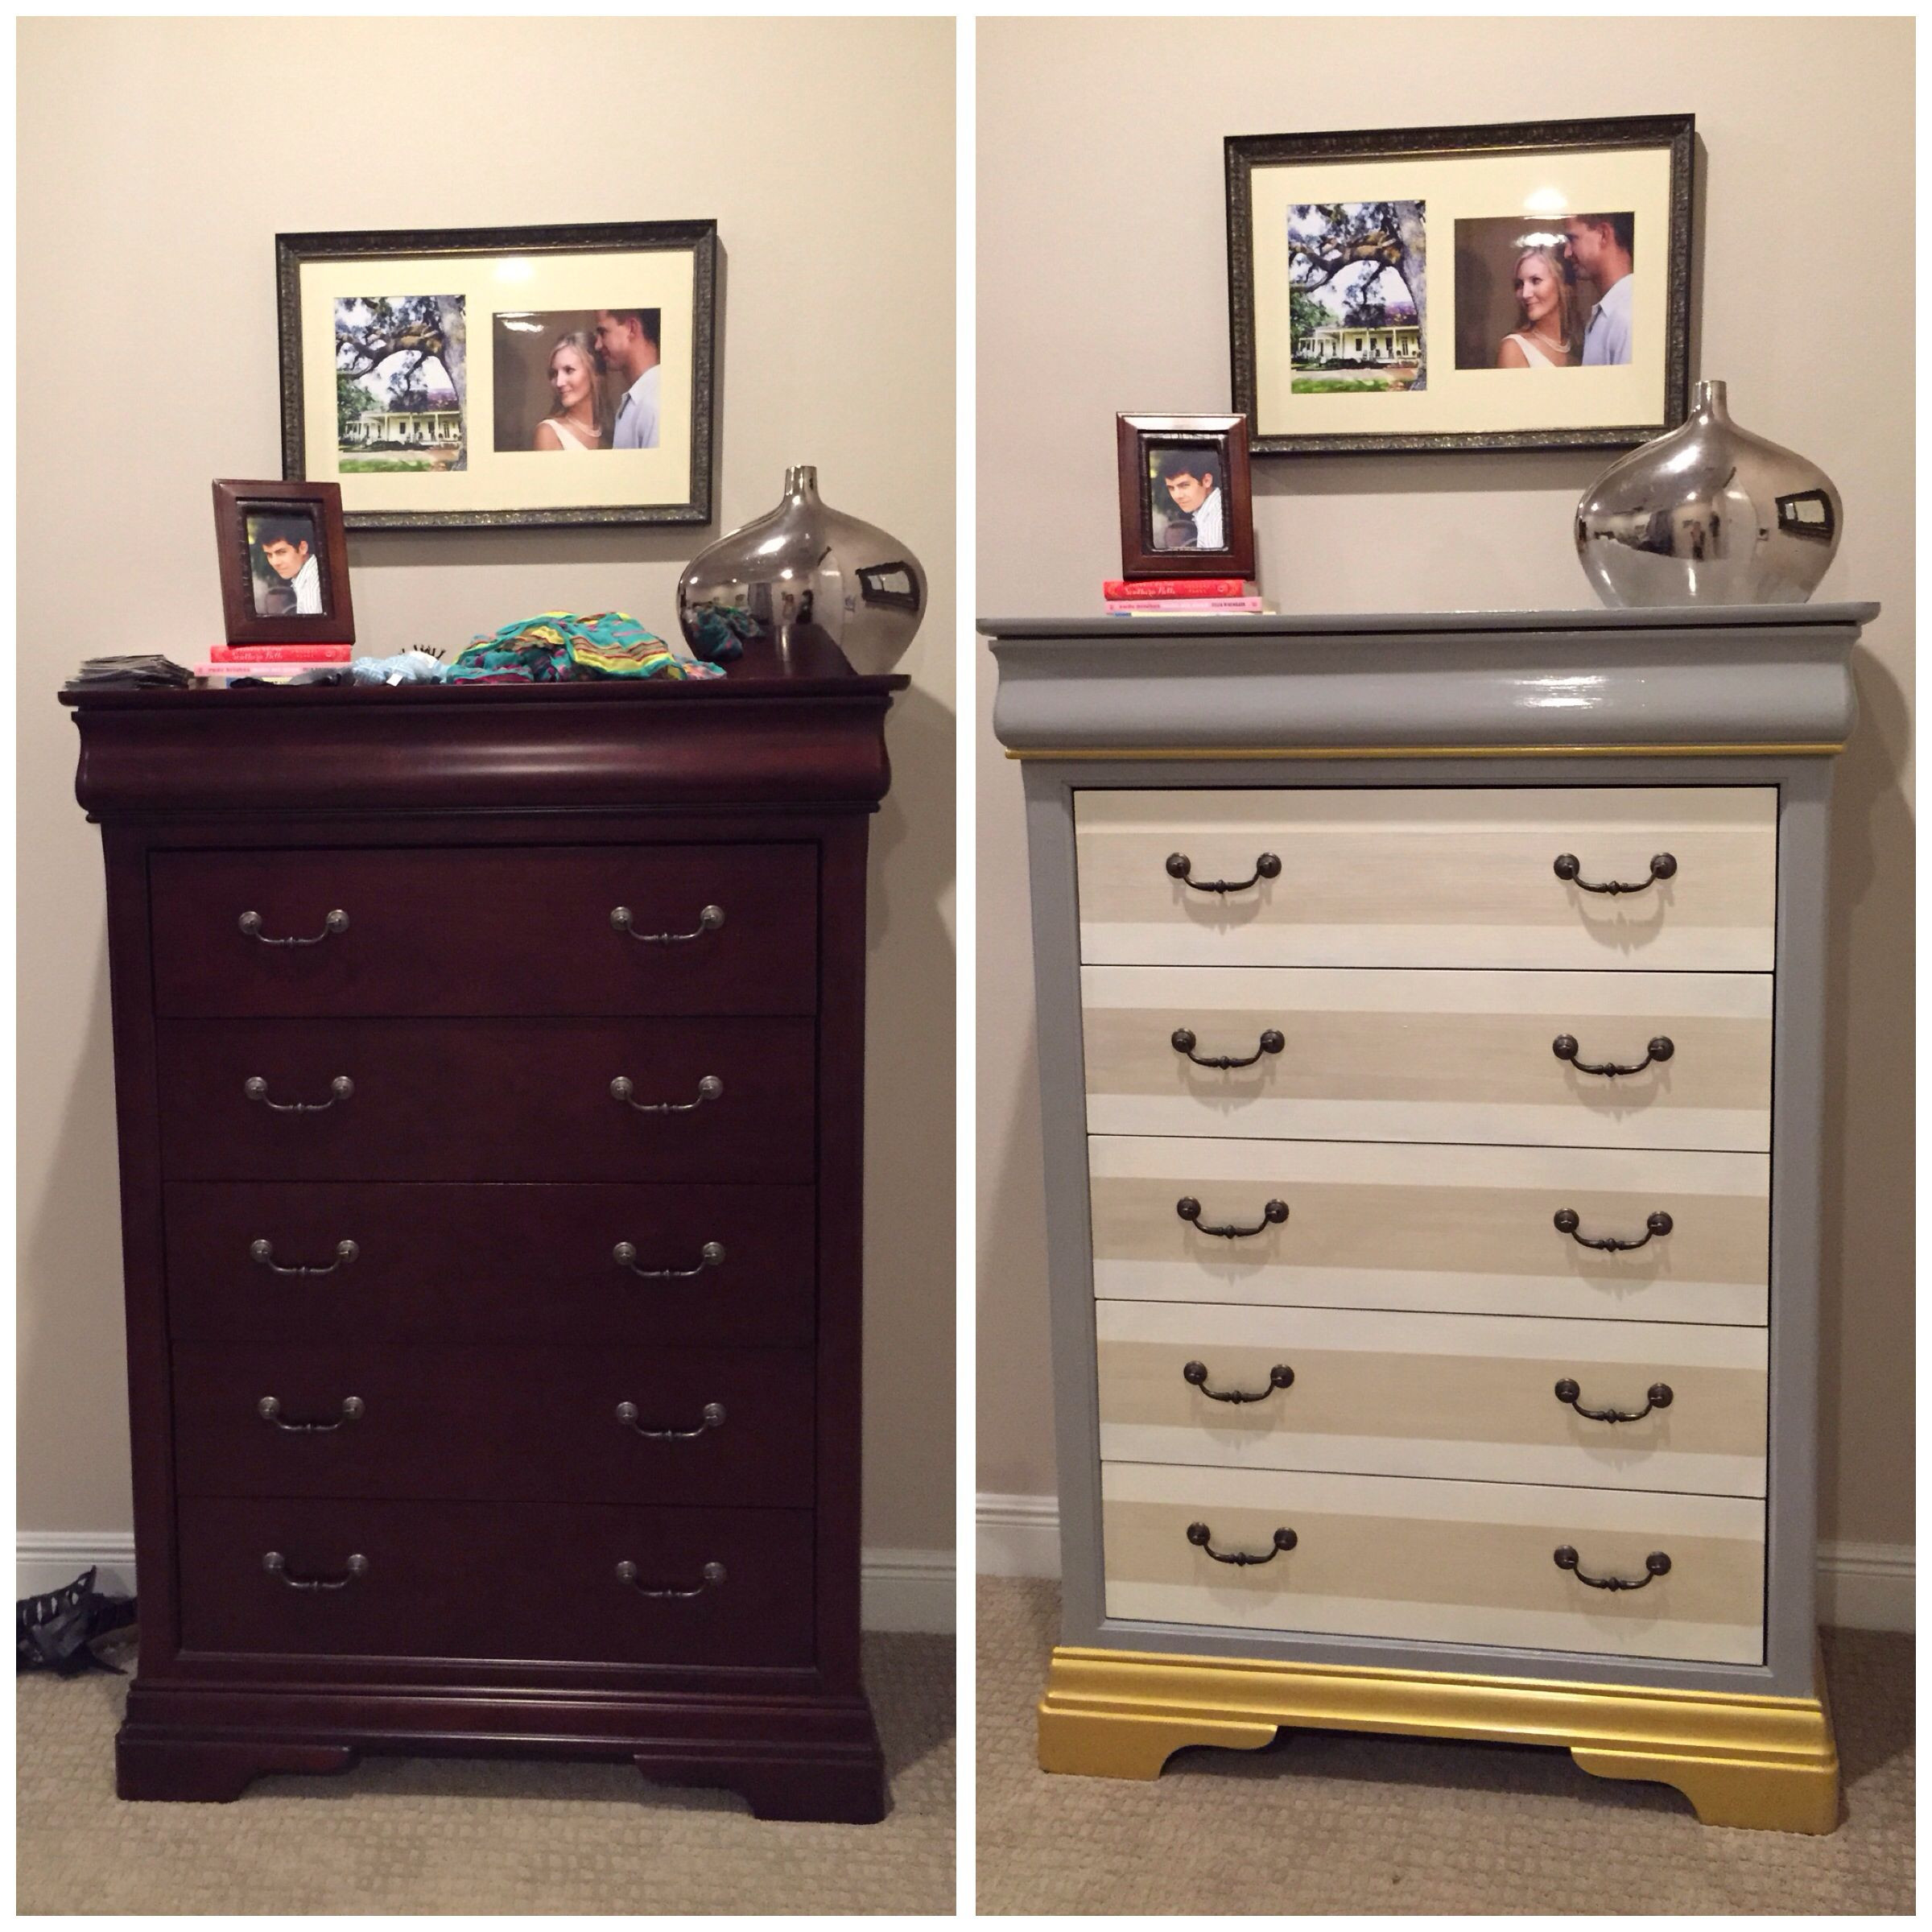 Chalk Paint Bedroom Furniture
 Bedroom furniture redo chest of drawers before & after